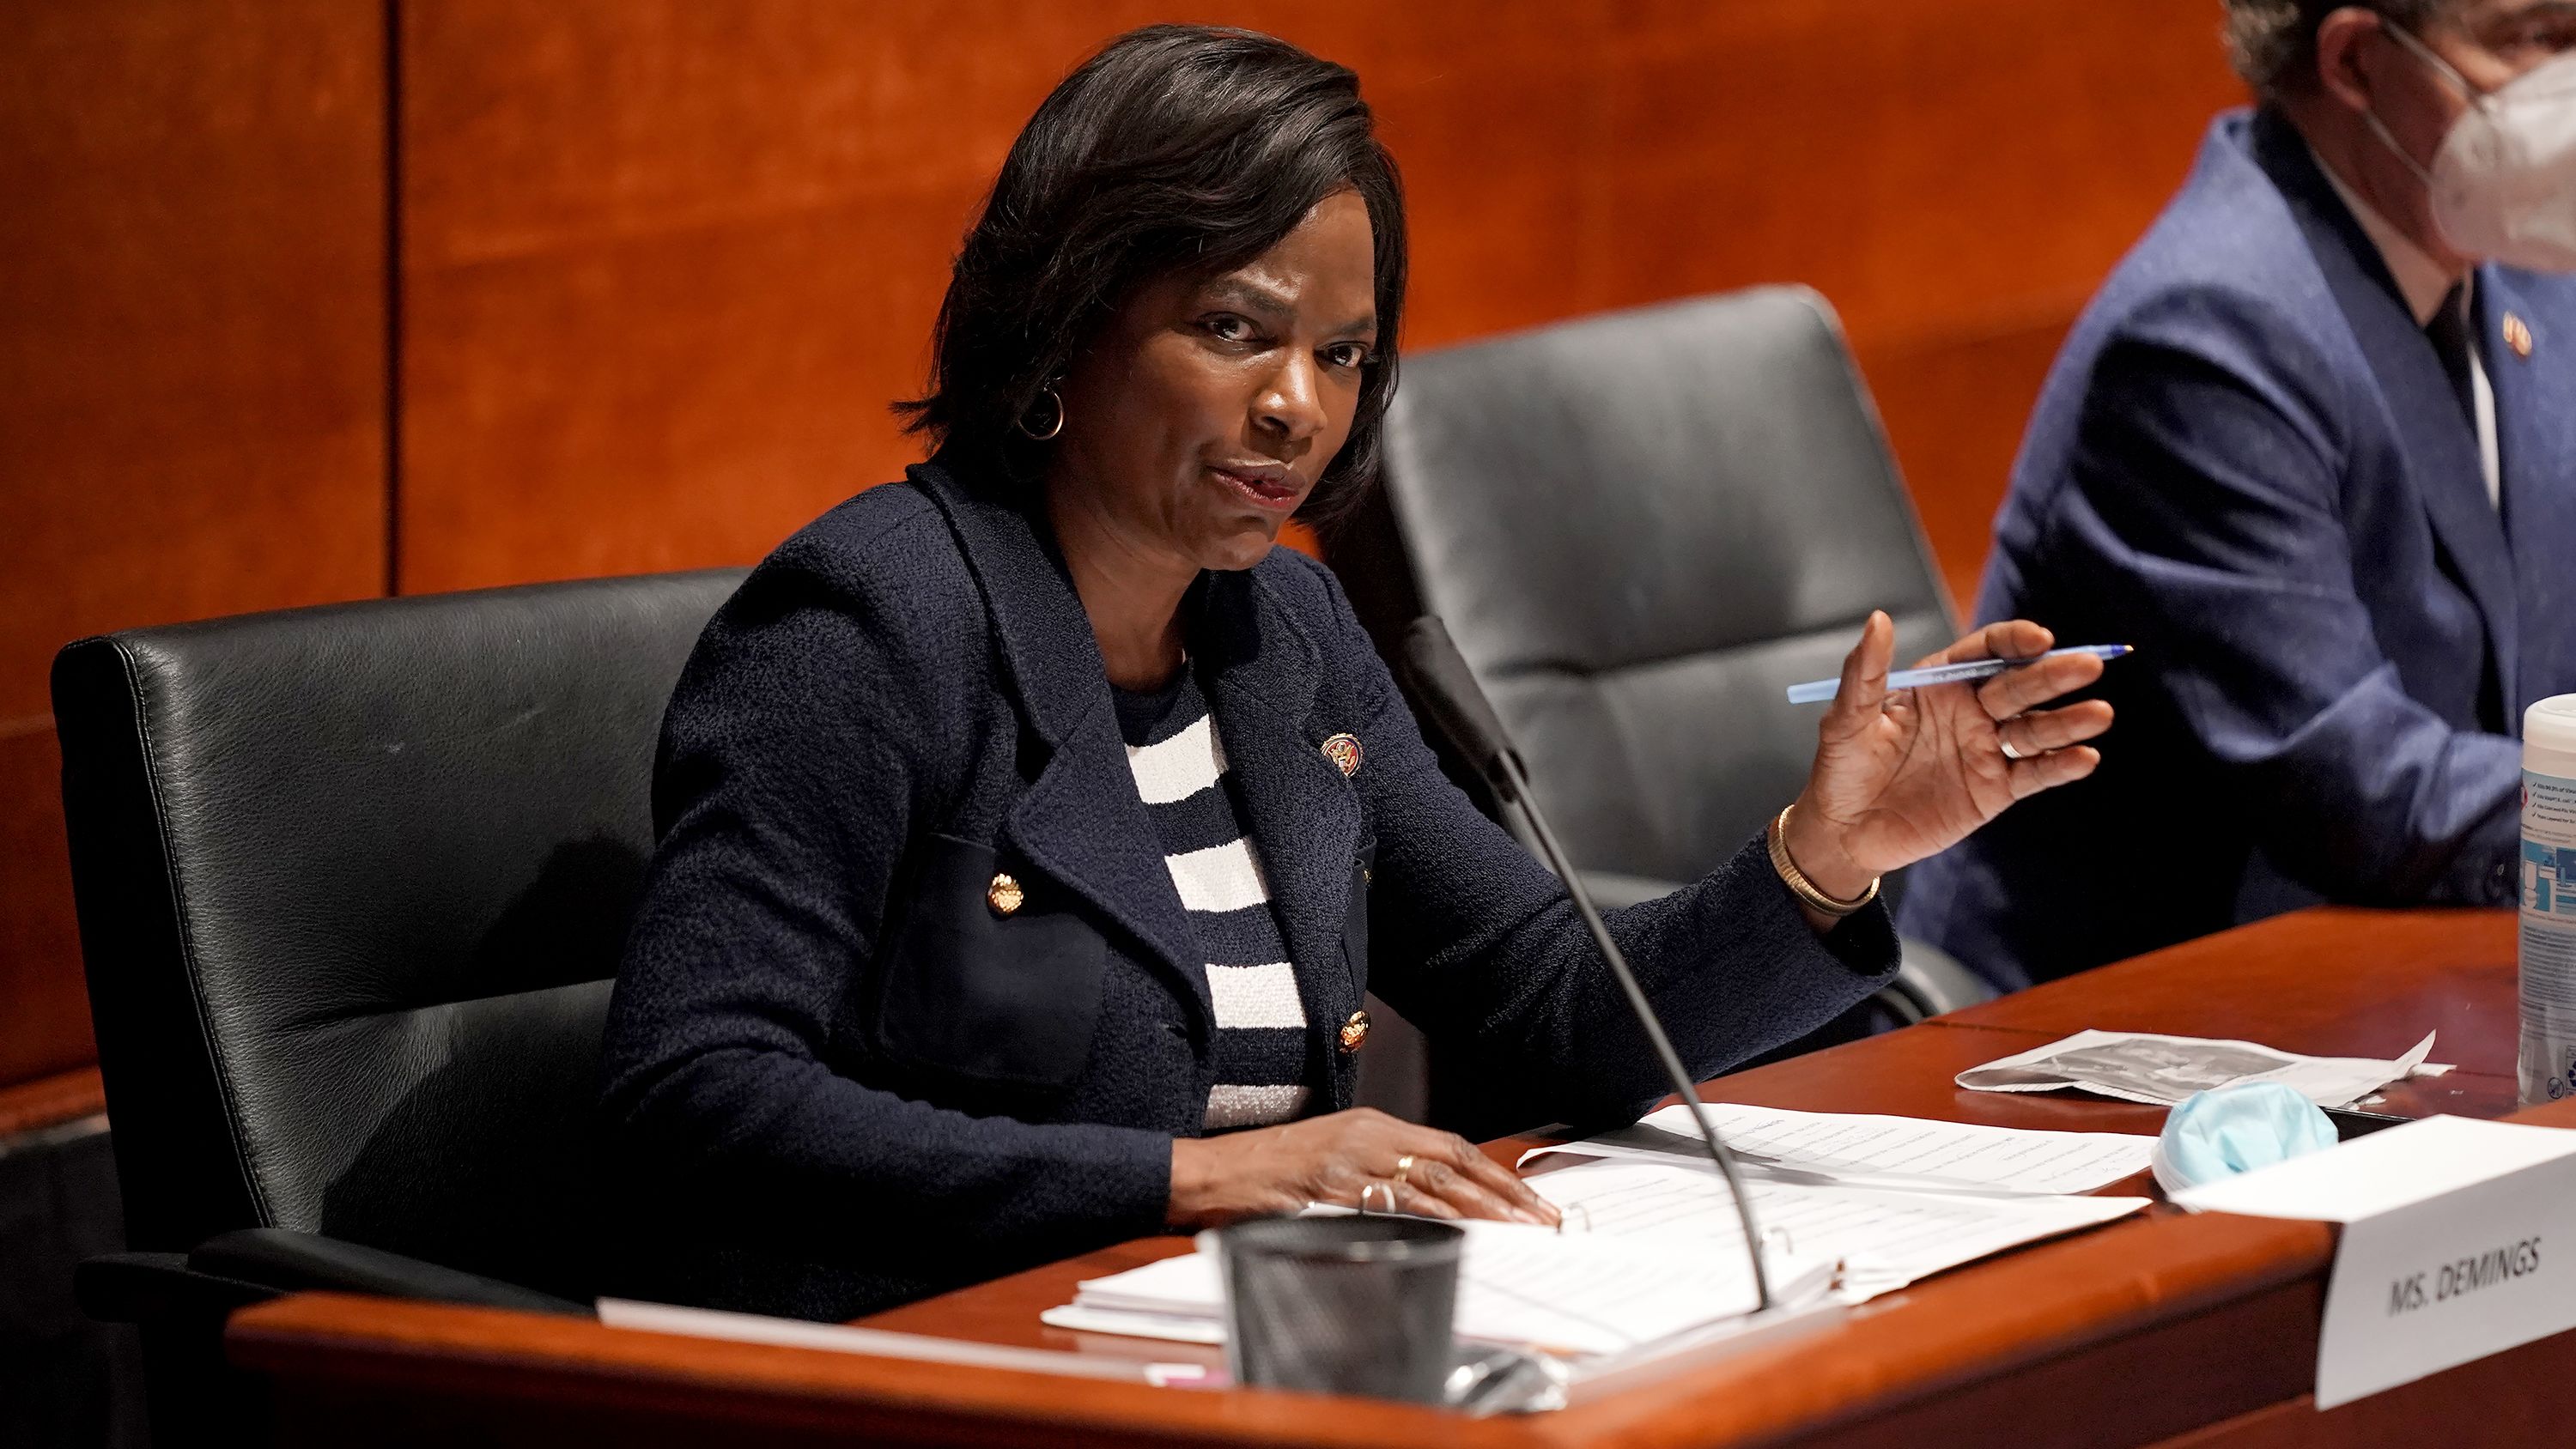 WASHINGTON, DC - JUNE 10:  U.S. Rep. Val Demings (D-FL) questions witnesses at a House Judiciary Committee hearing on police brutality and racial profiling on June 10, 2020 in Washington, DC.  (Photo by Greg Nash-Pool/Getty Images)